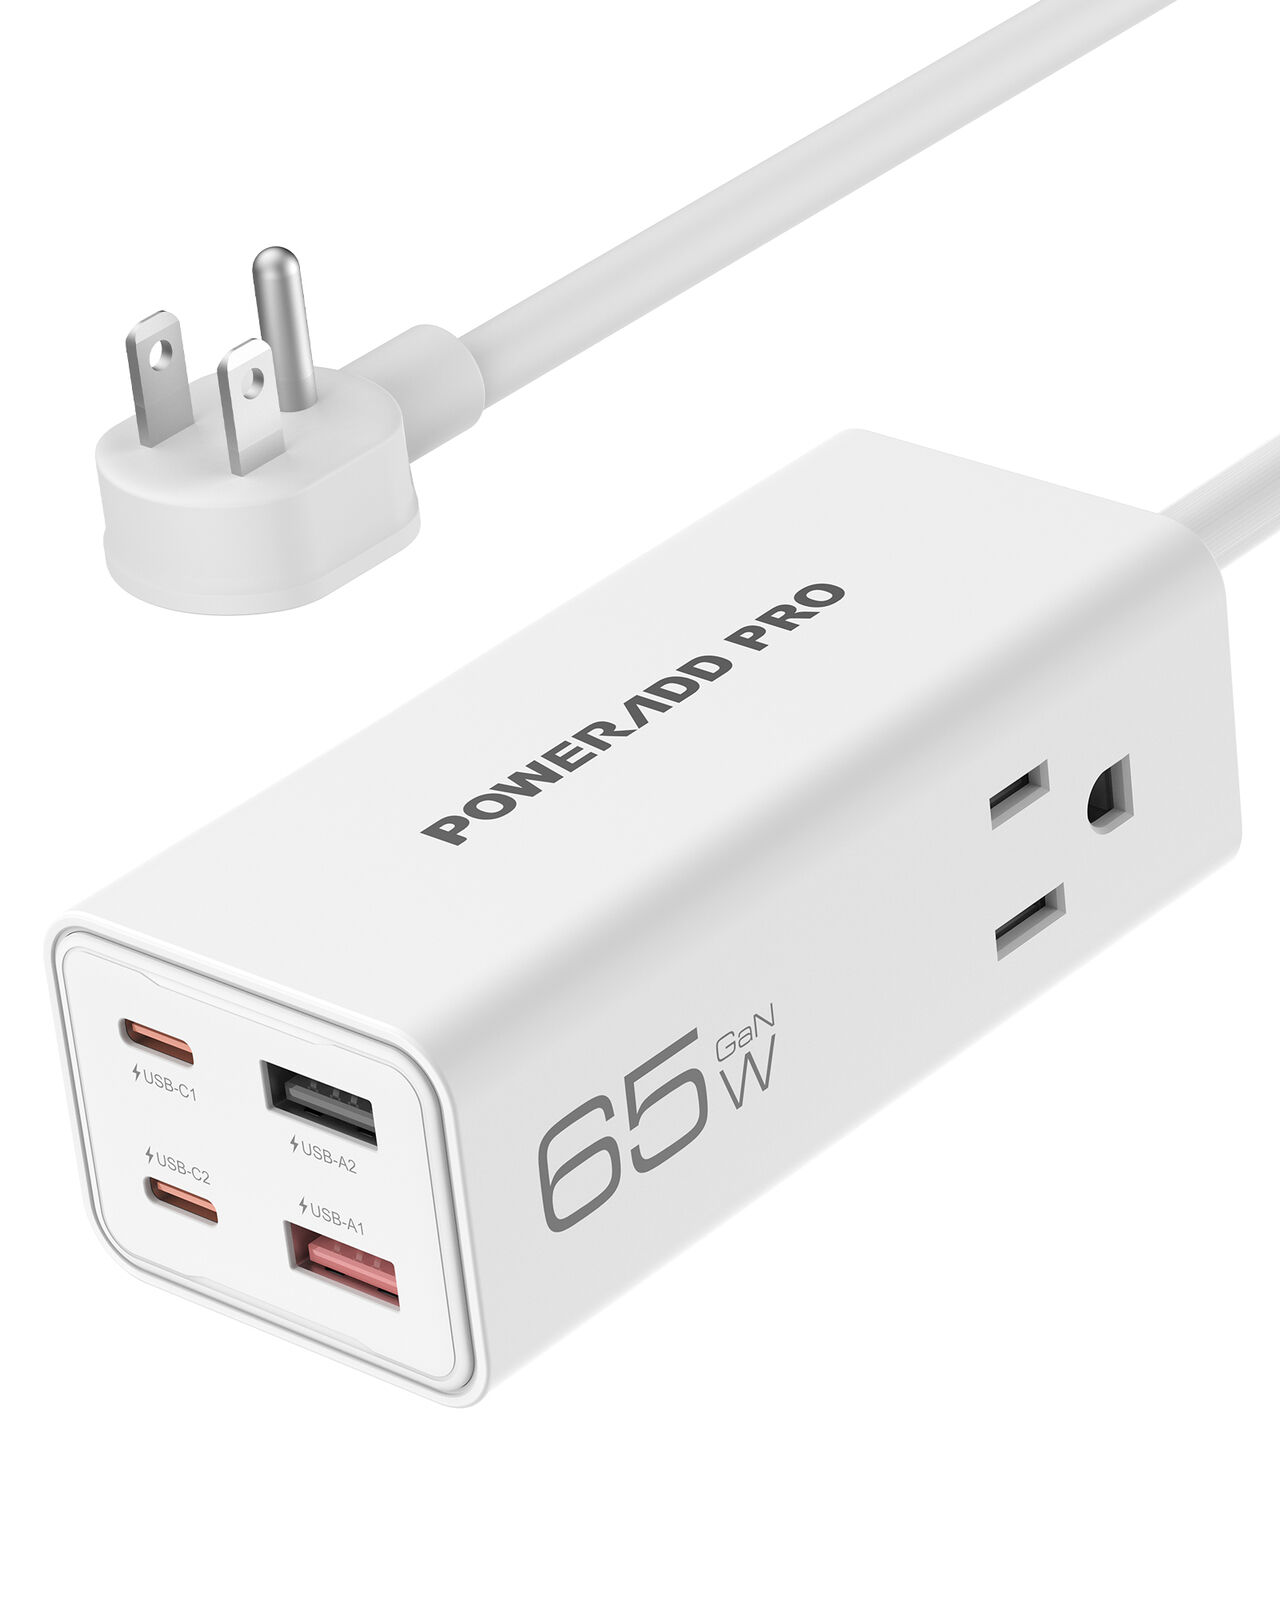 65W Gan Charger PD USB type C Fast Charging Station for iPhone Macbook